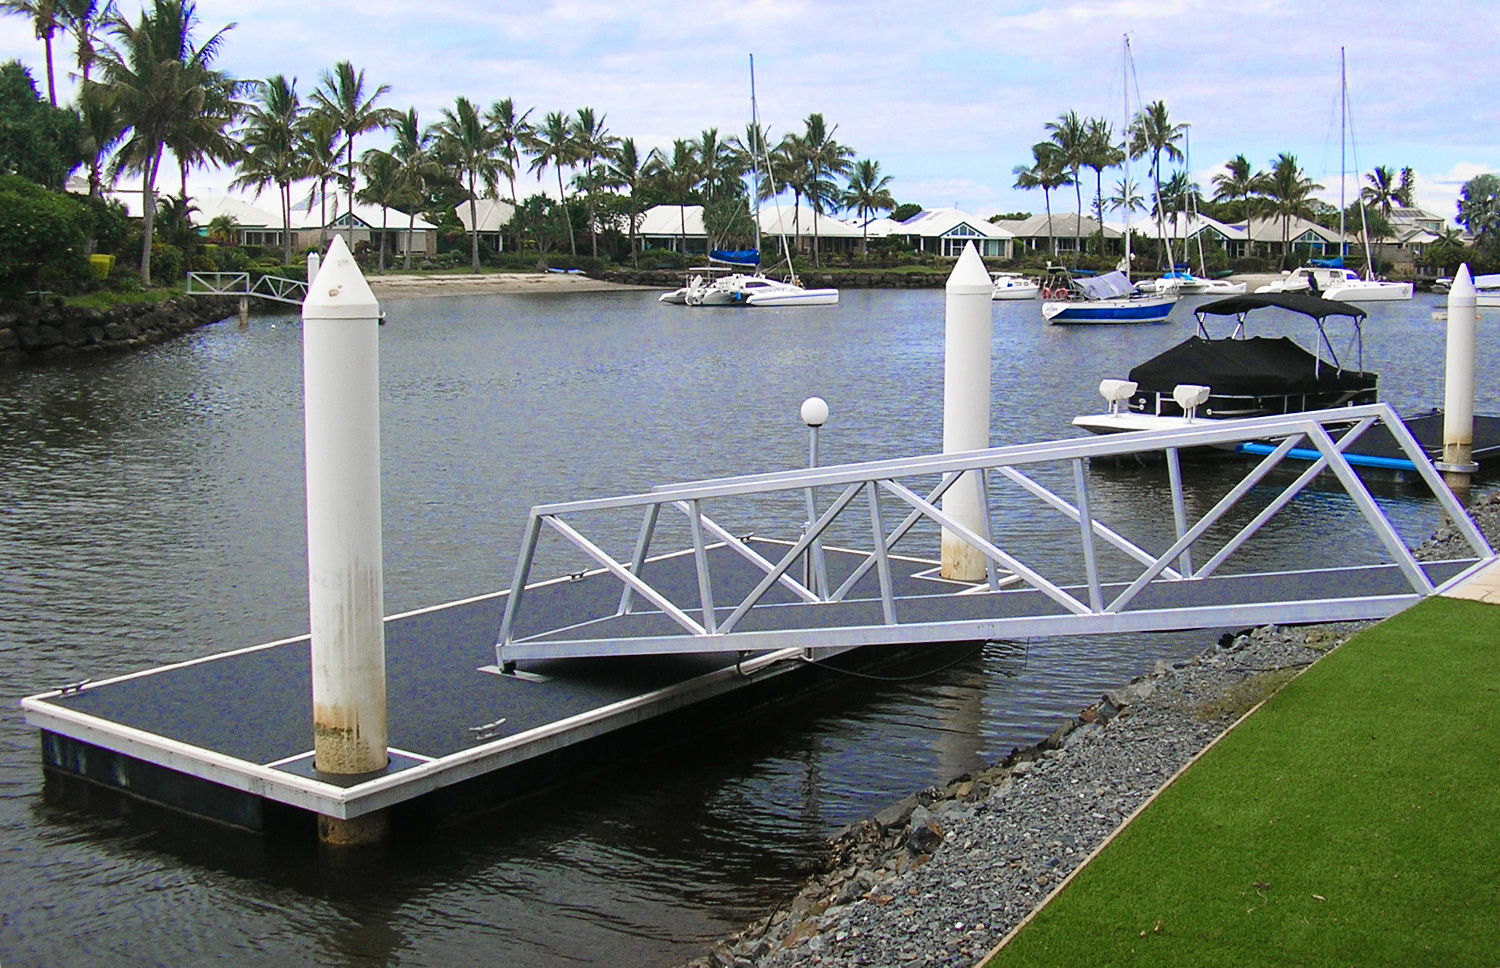 Pontoon vs Jetty - What's the Difference